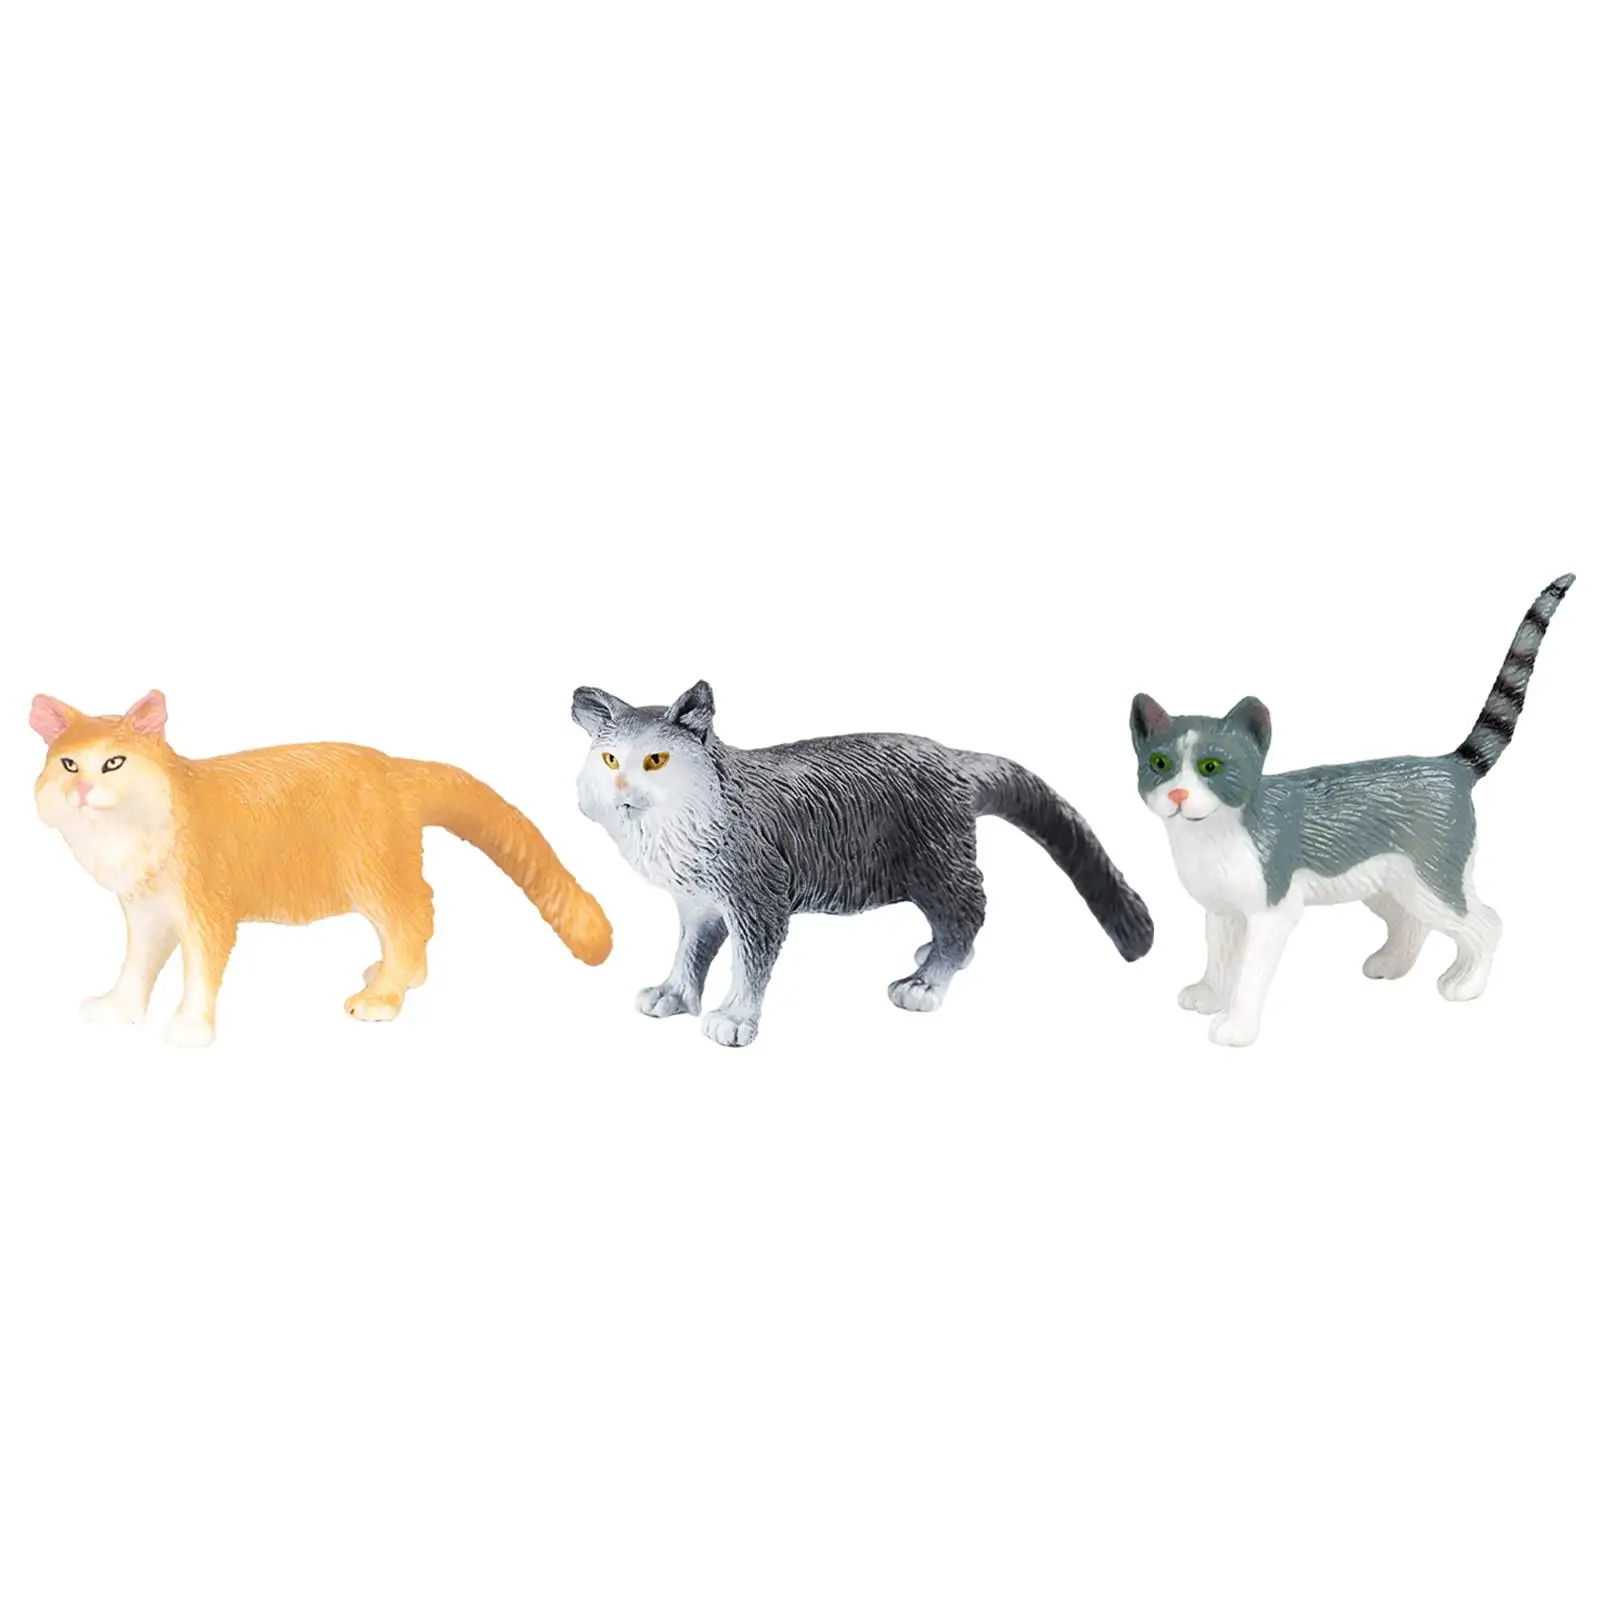 Simulation Animals Figures Educational Toys Small Cat Figures Toy Cat Figurines for Home Decor Cake Topper Party Favor